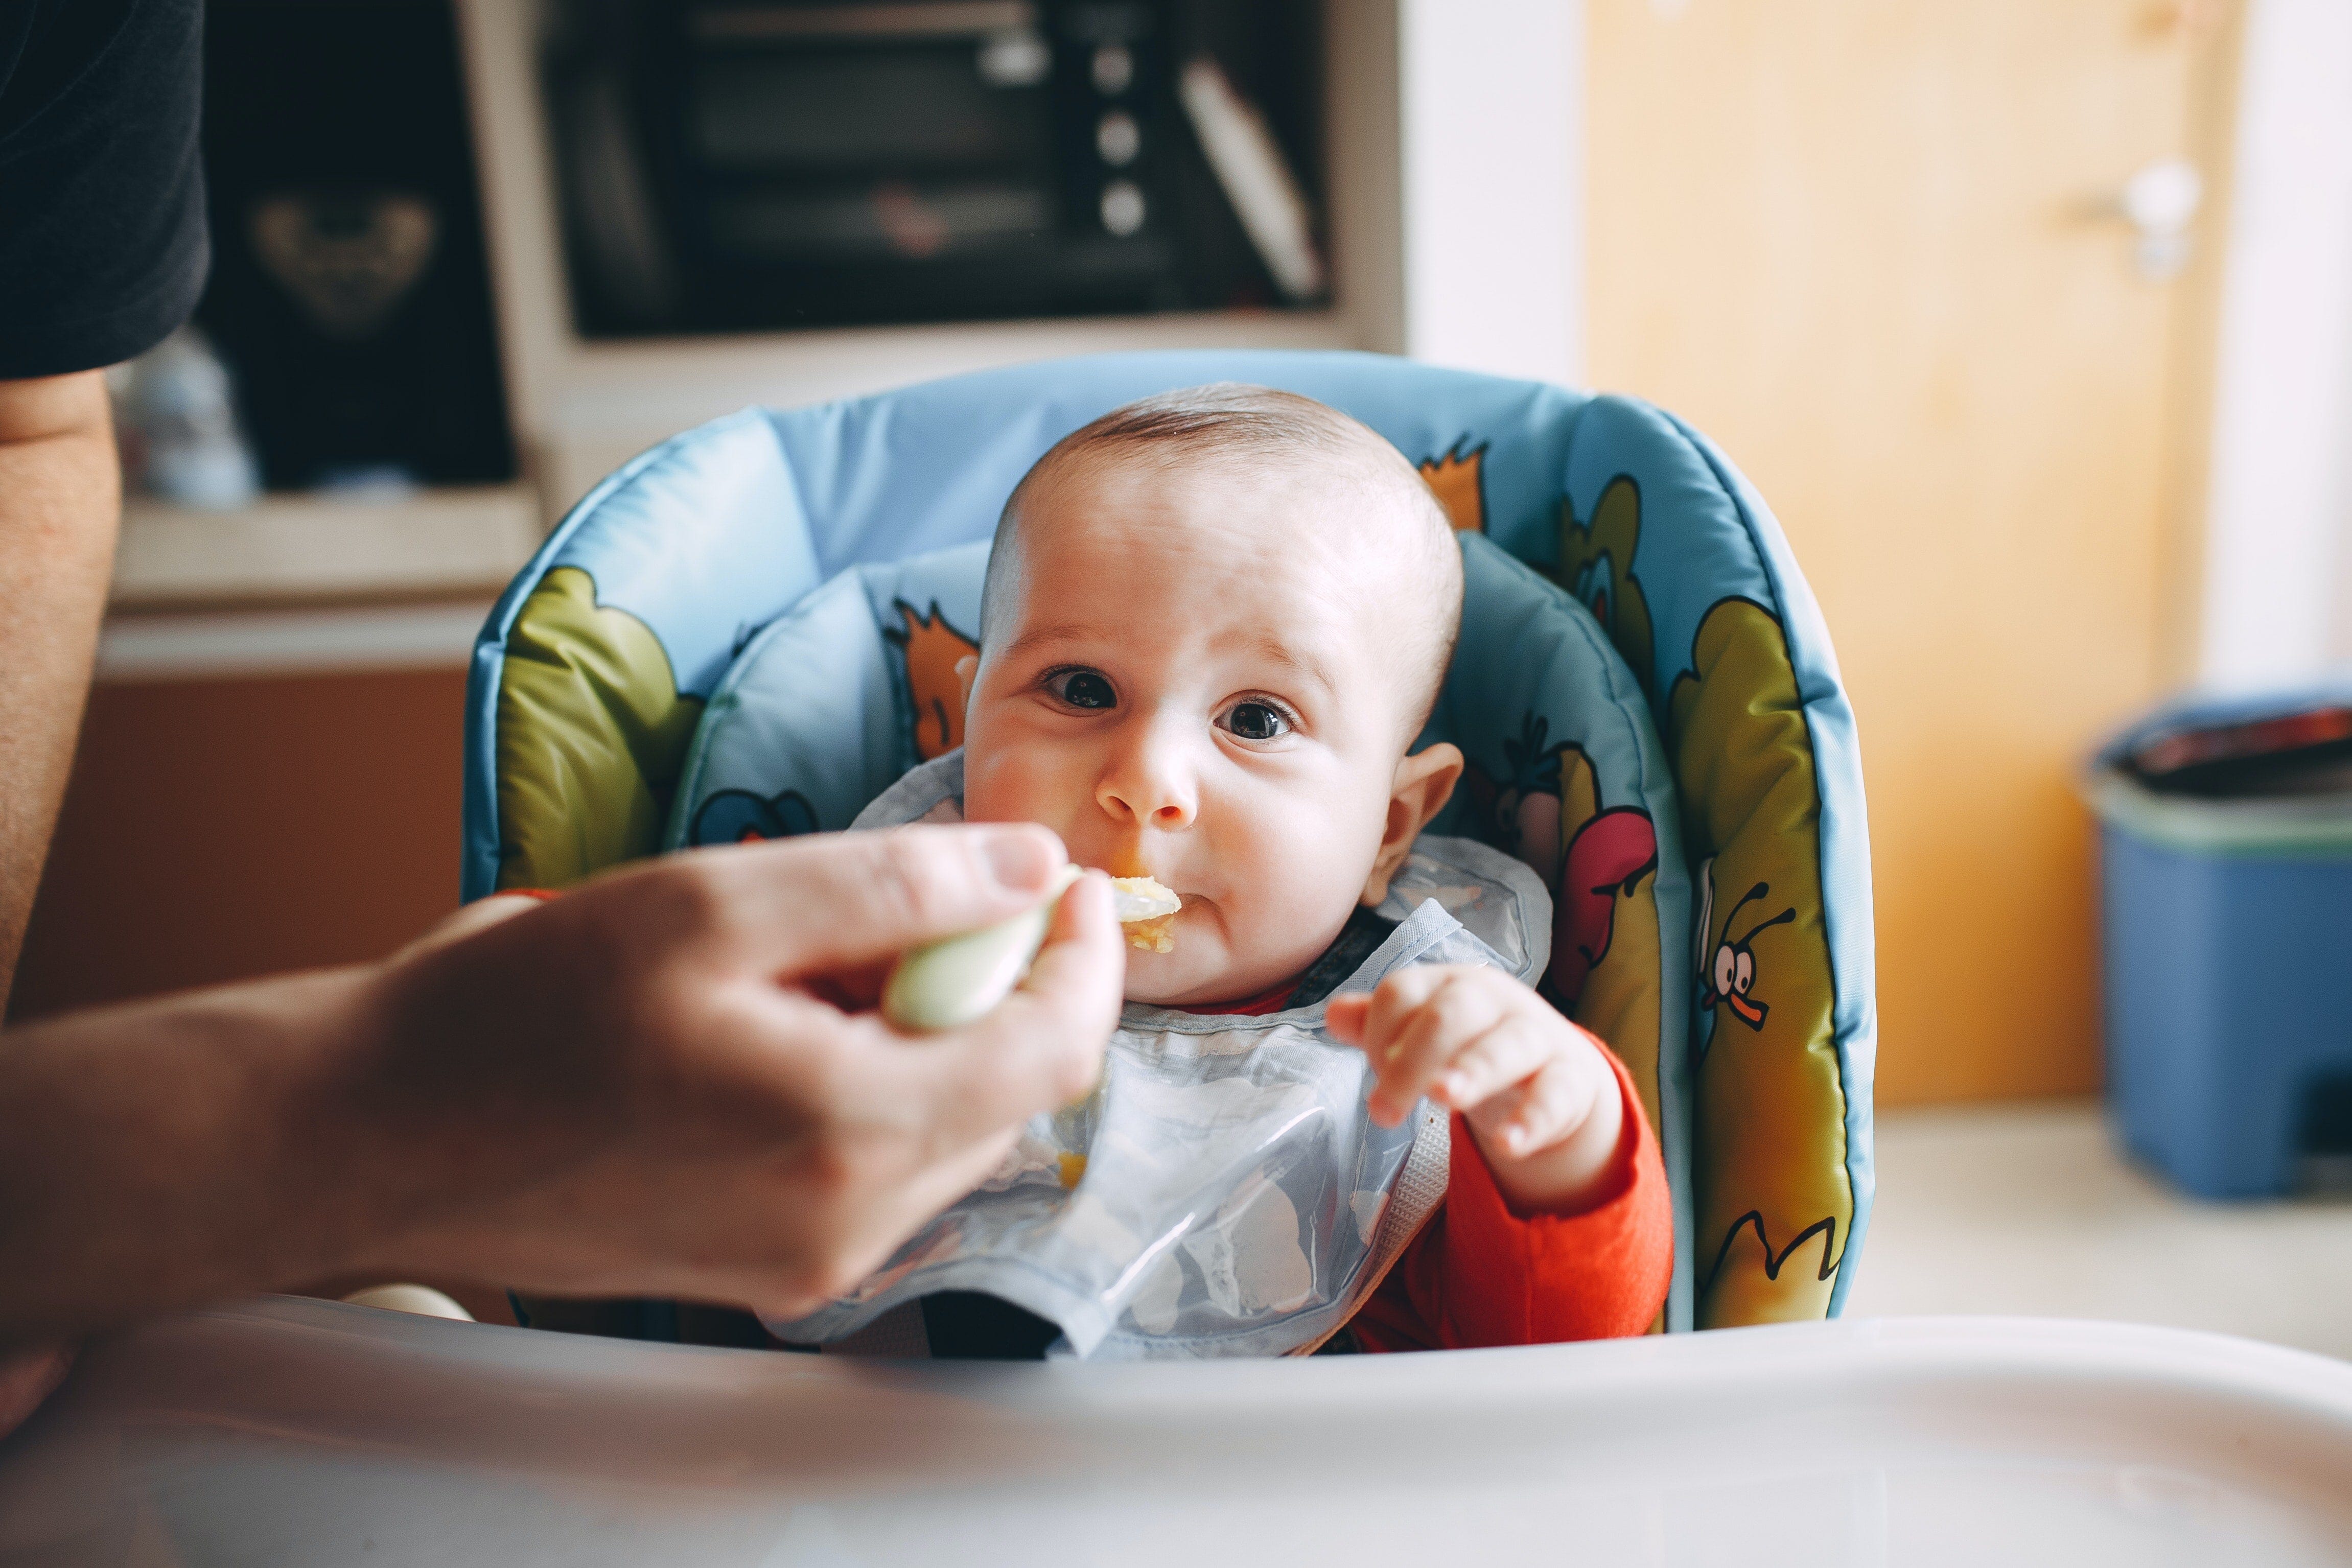 How to Start Weaning: Baby-led Weaning vs Purees